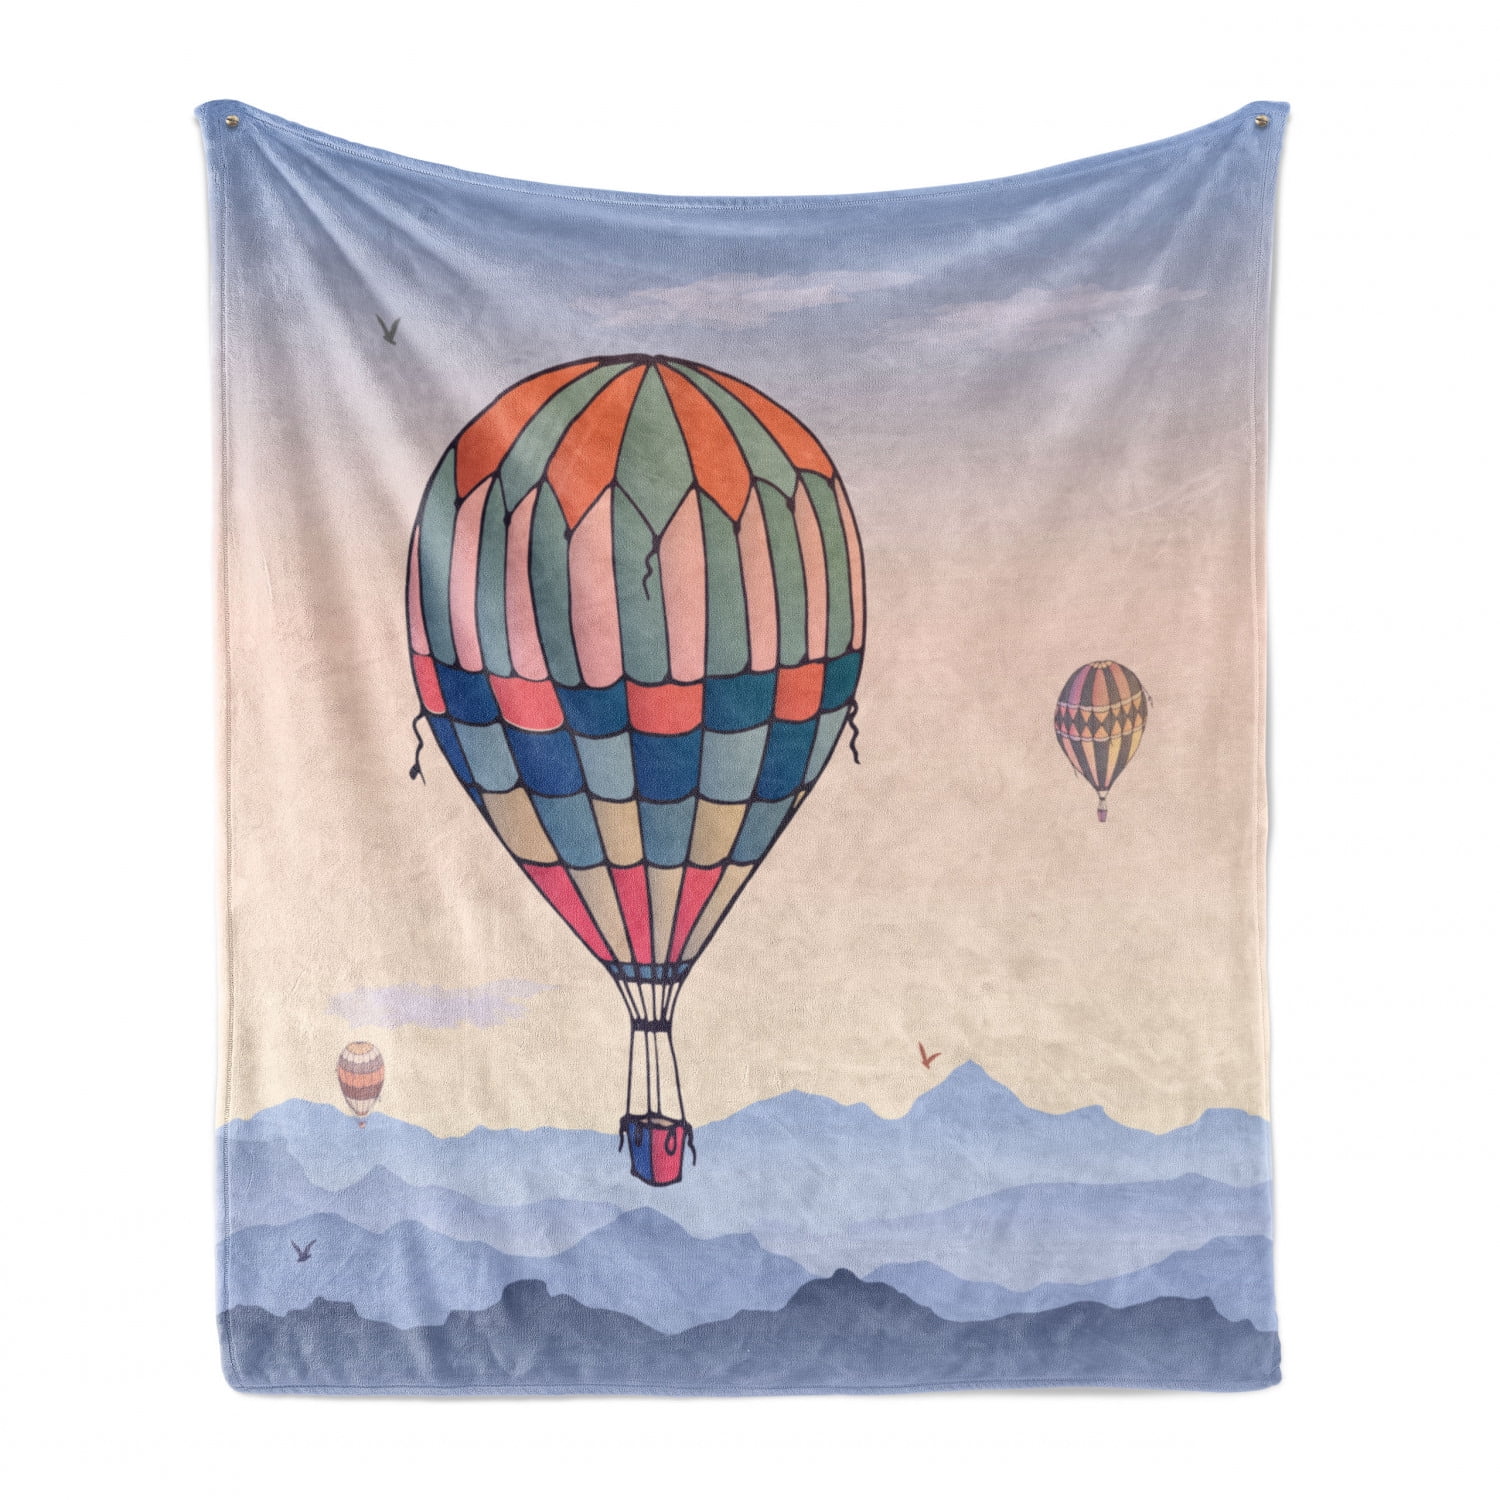 Ultra-Soft Micro Fleece Blanket Cartoon Hot Air Balloon Soft and Warm Throw Blanket for Bed Couch Living Room 